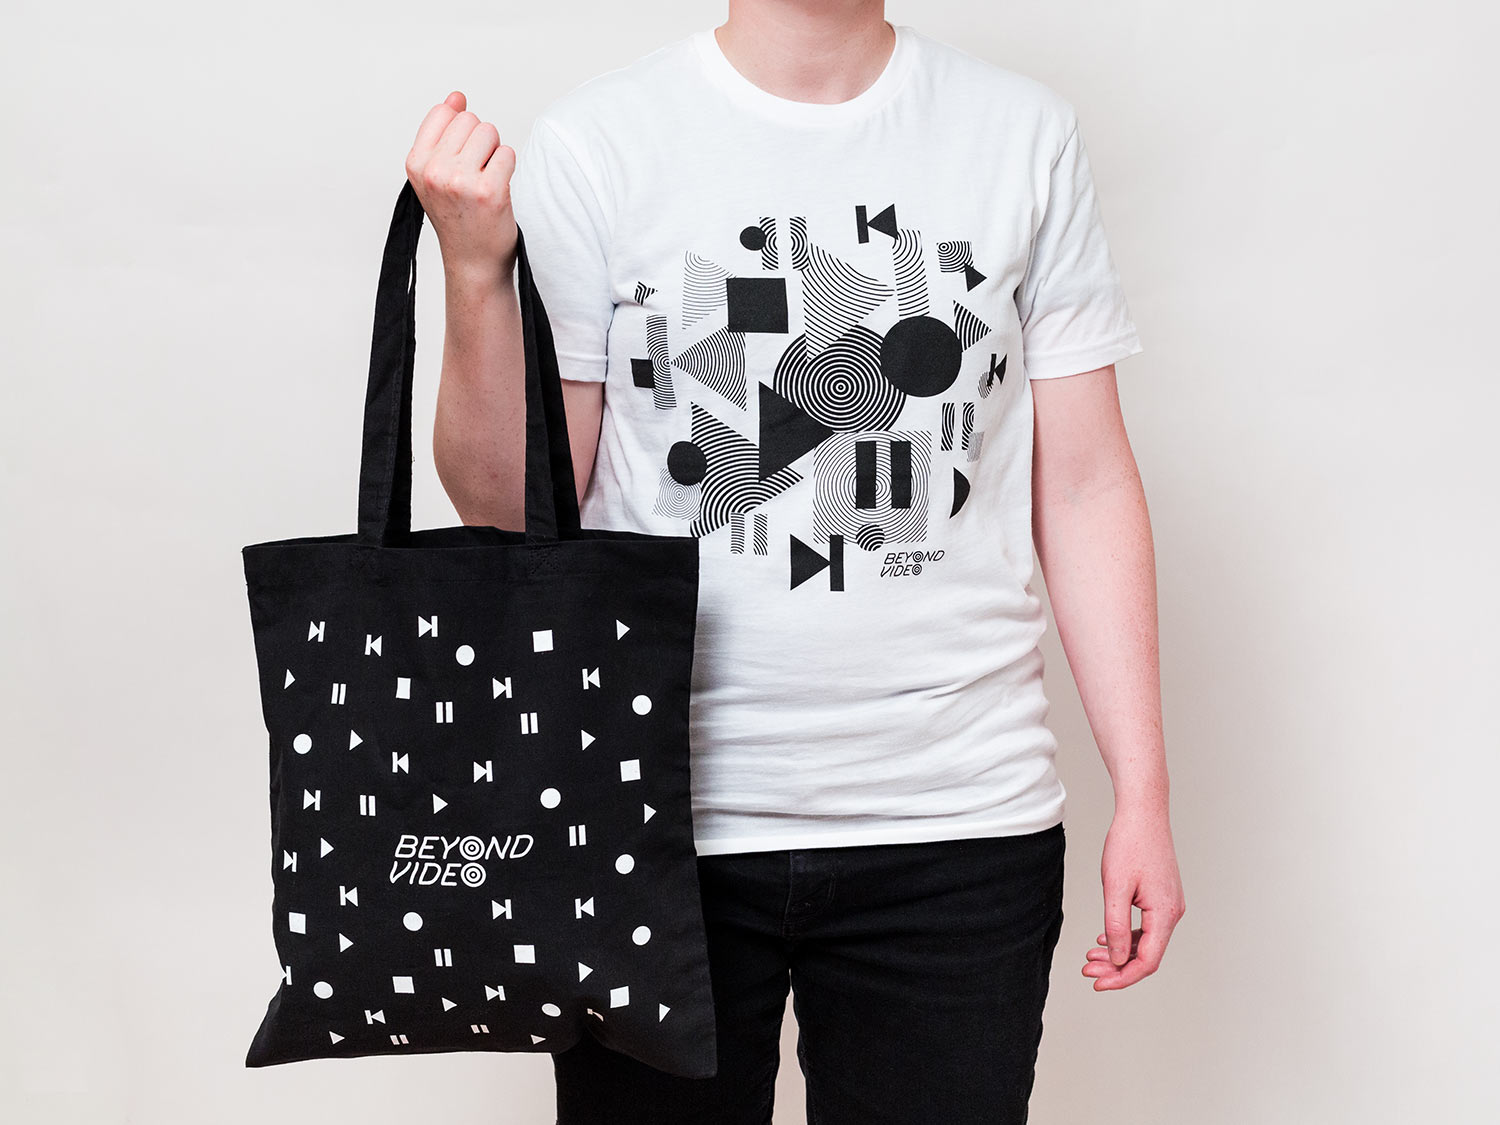 Black and white tote bag and T-shirt designs for Beyond Video, featuring a pattern of video and VHS control icons, part of brand identity for contemporary video store and lending library